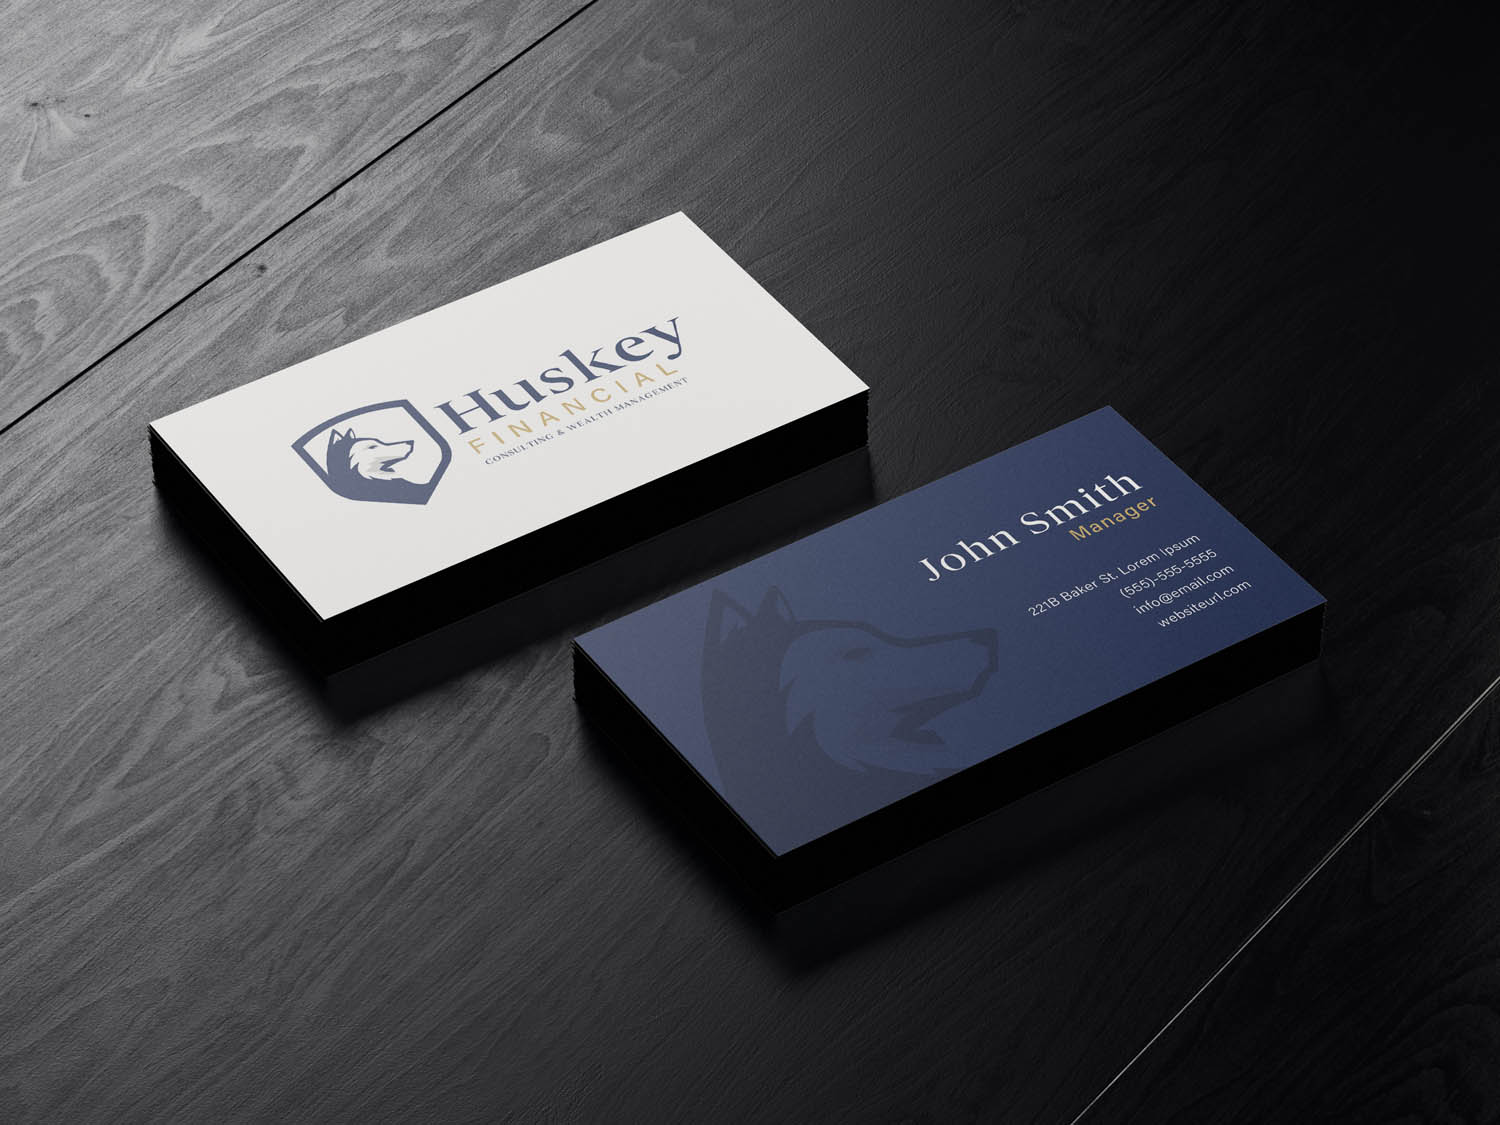 Huskey Business Cards